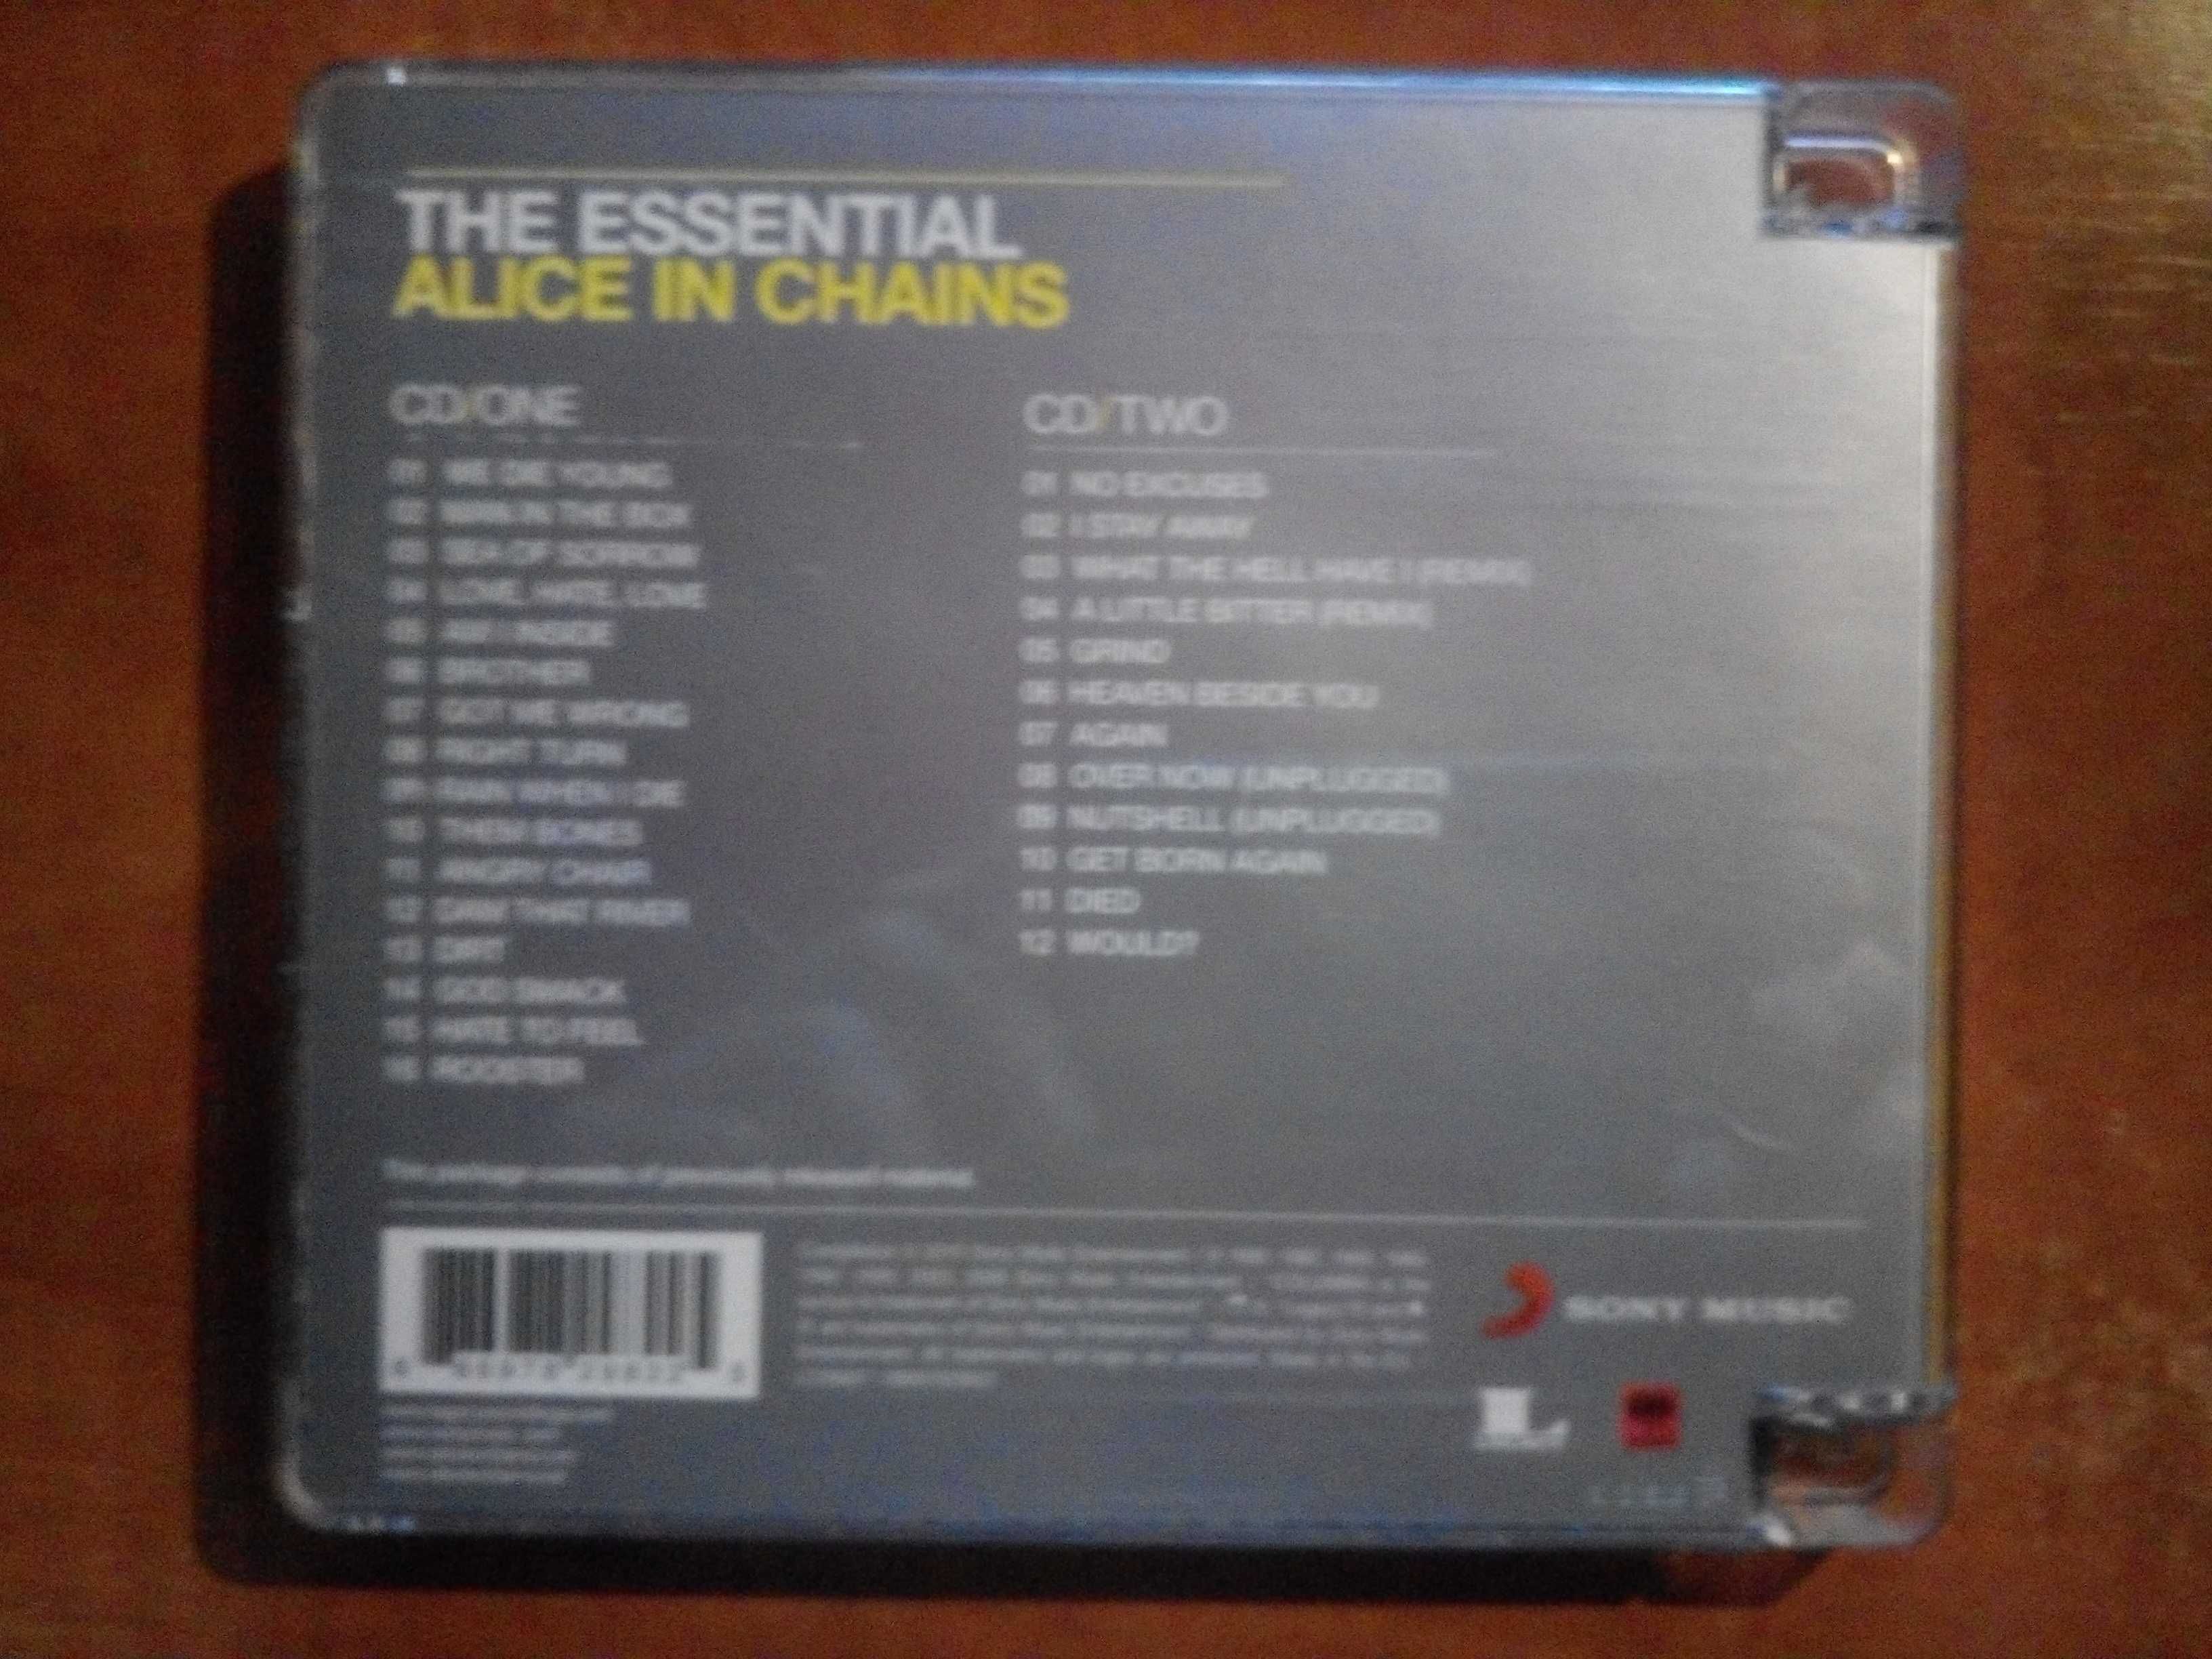 Cd "The Essential Alice in Chains"